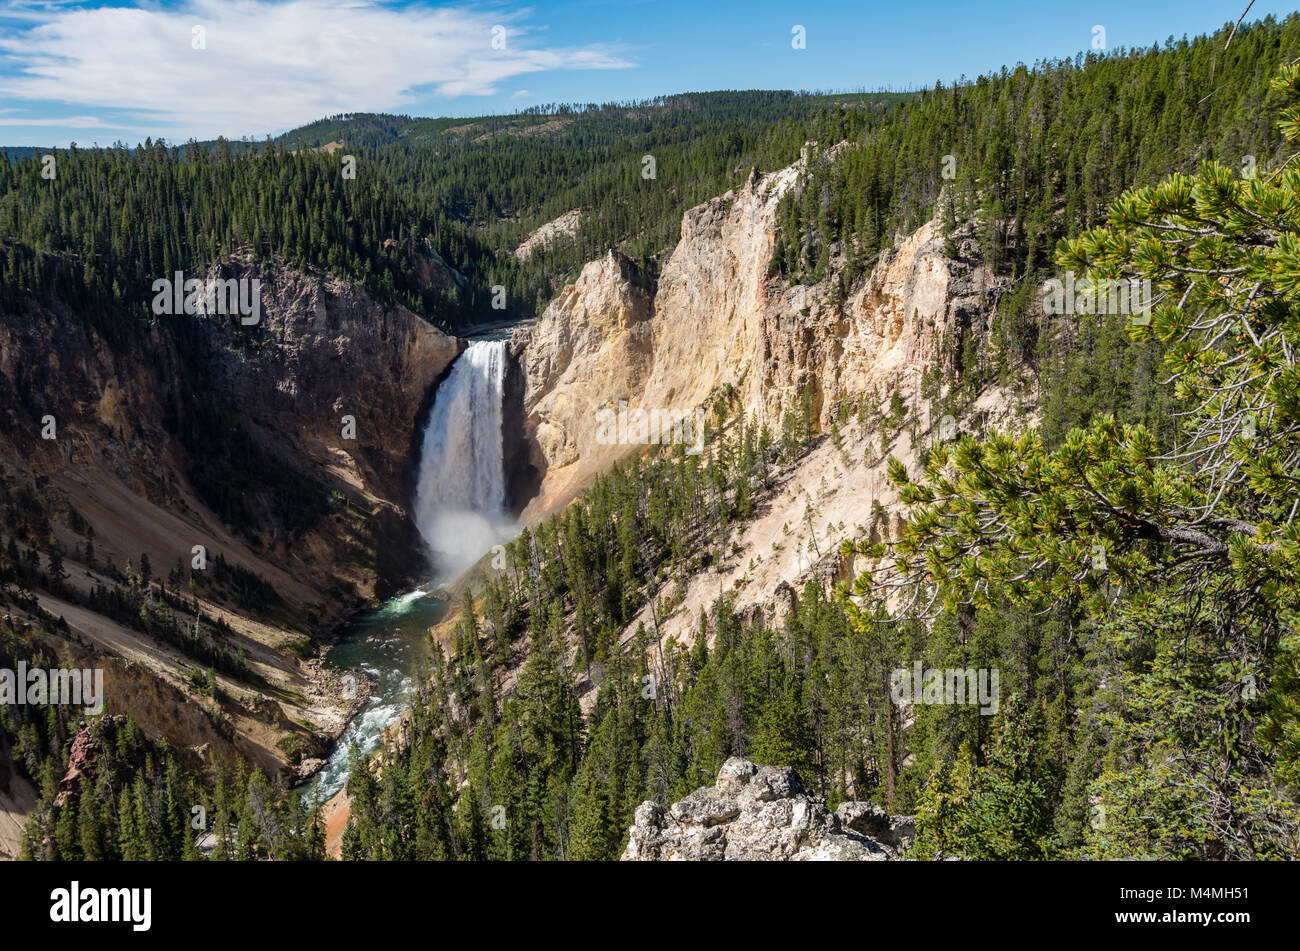 View of the Lower Falls of the Yellowstone RIver from Lookout Point.  Yellowstone National Park, Wyoming, USA Stock Photo